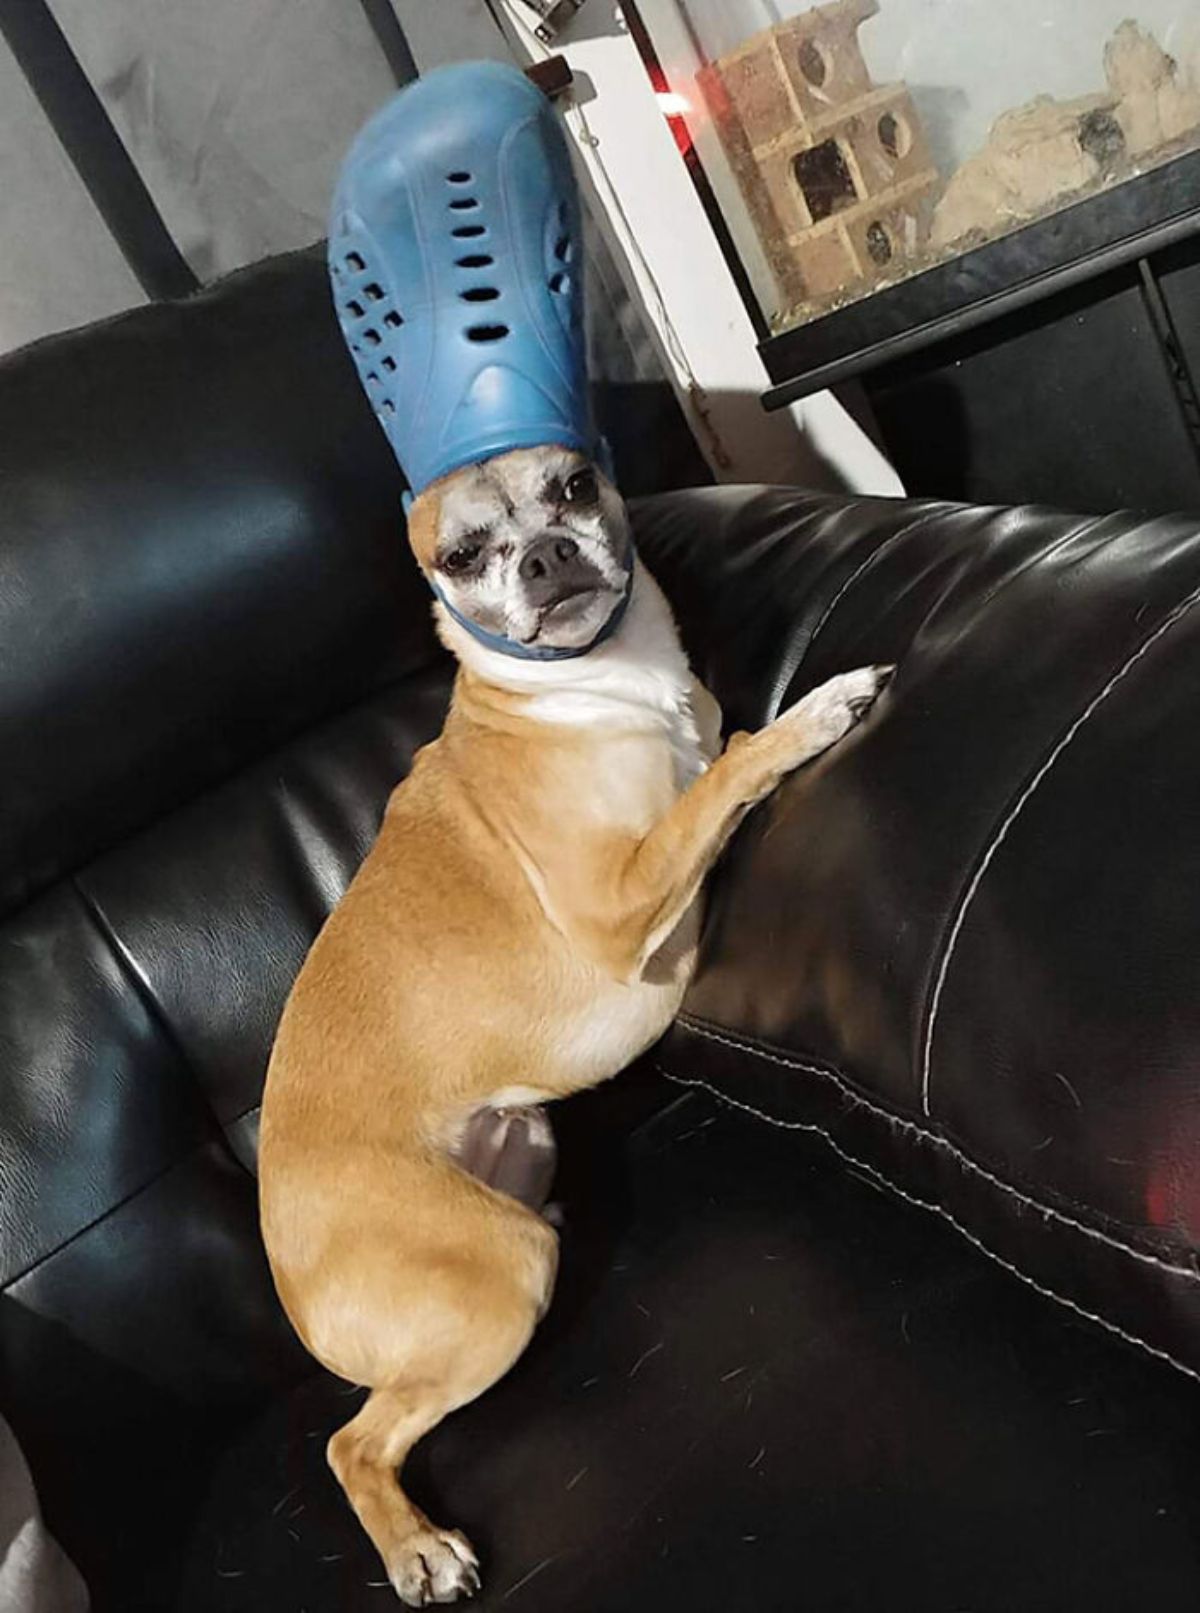 brown and white dog on a black sofa wearing blue crocs slipper on the head